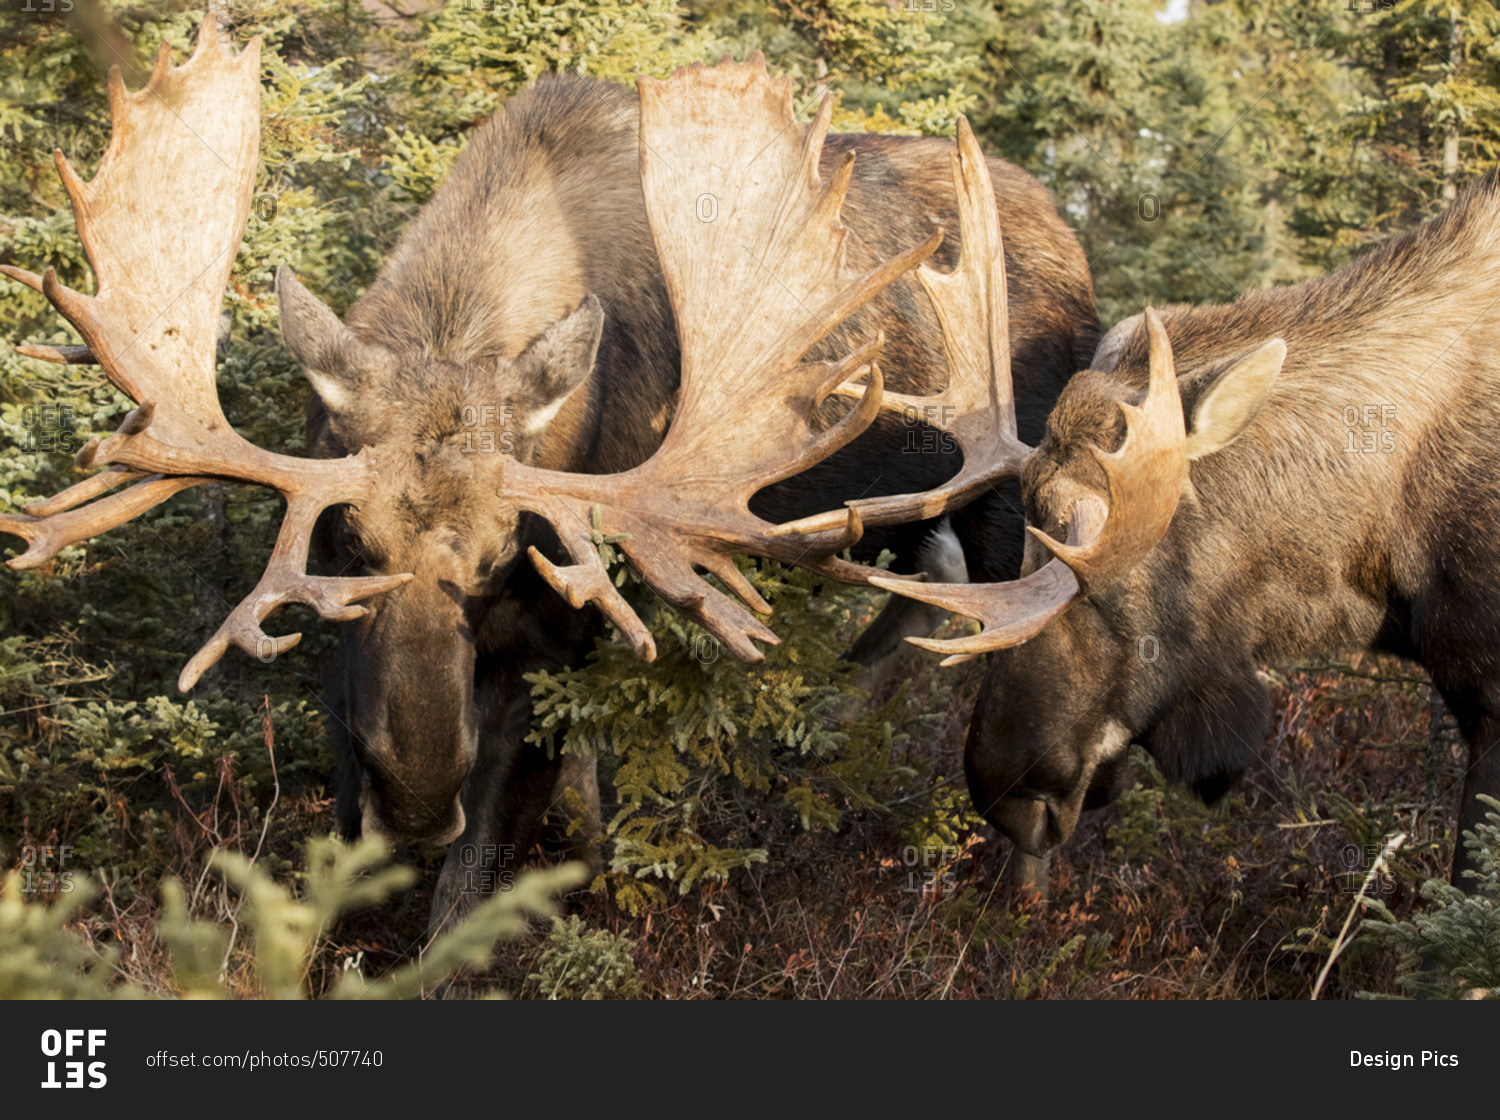 Bull moose (alces alces) play fighting during rutting season in the Anchorage area; Alaska, United States of America